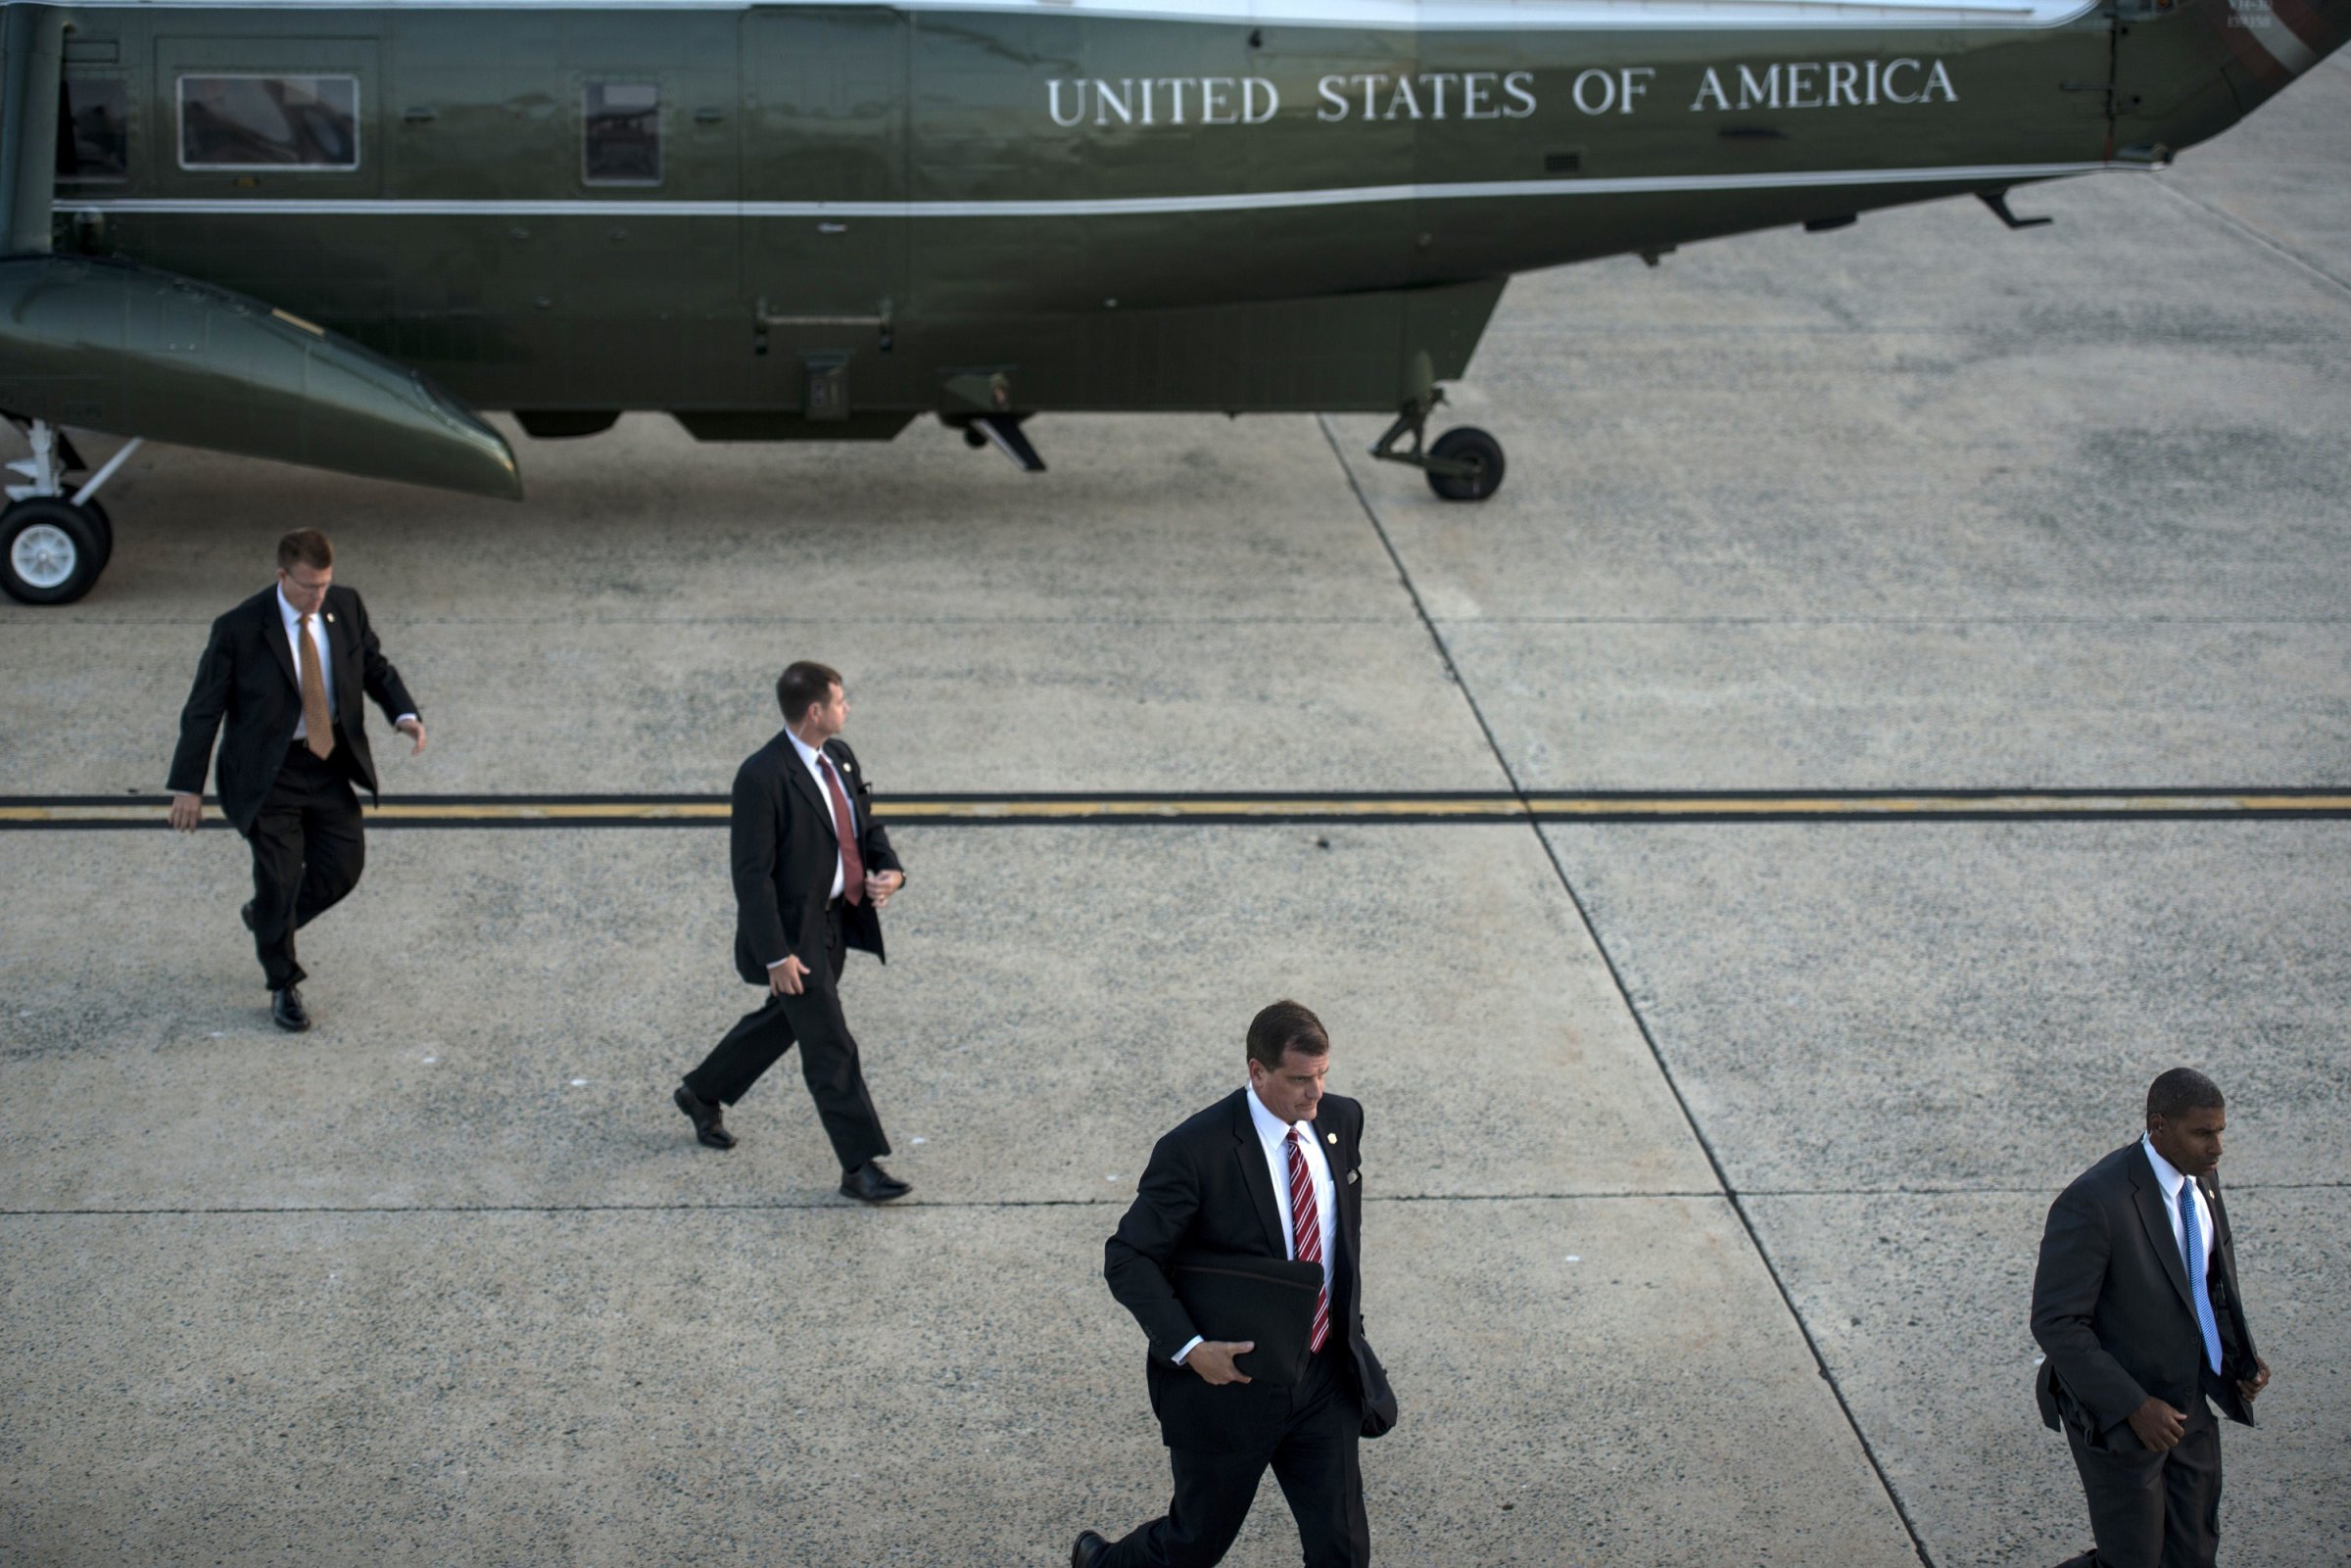 Members of the US Secret Service arrive to escort President Barack Obama on a trip at Andrews Air Force Base on Oct. 1, 2014 in Maryland.